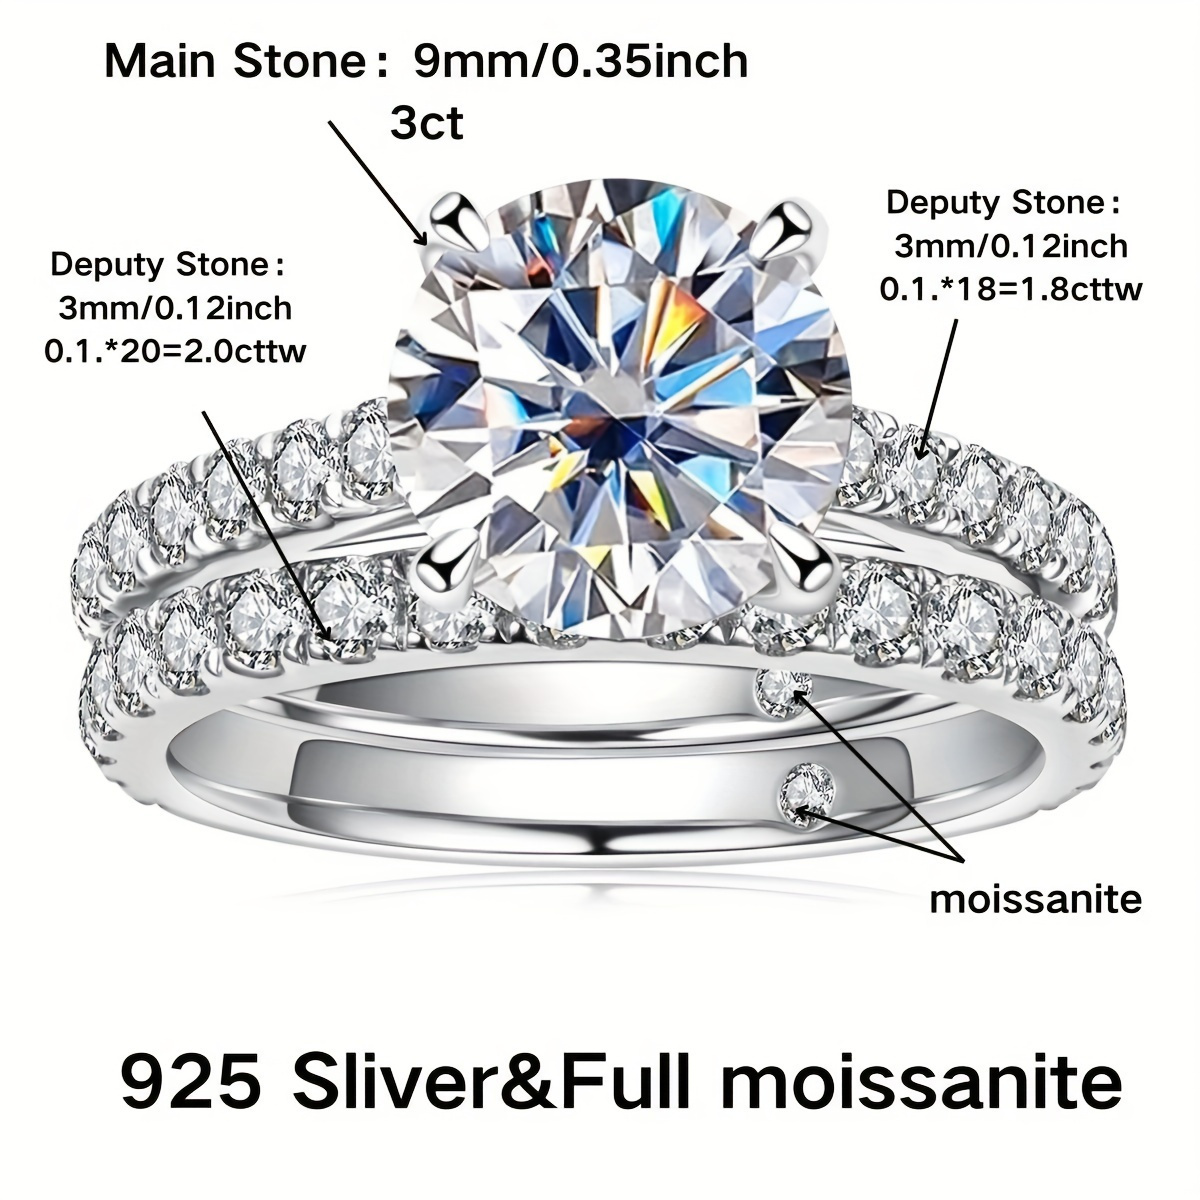 

Luxurious Fashion Set Ring S925 Silver D Color 6.8cttw, 3ct Main Stone Moissanite Ring, Inlaid Stone